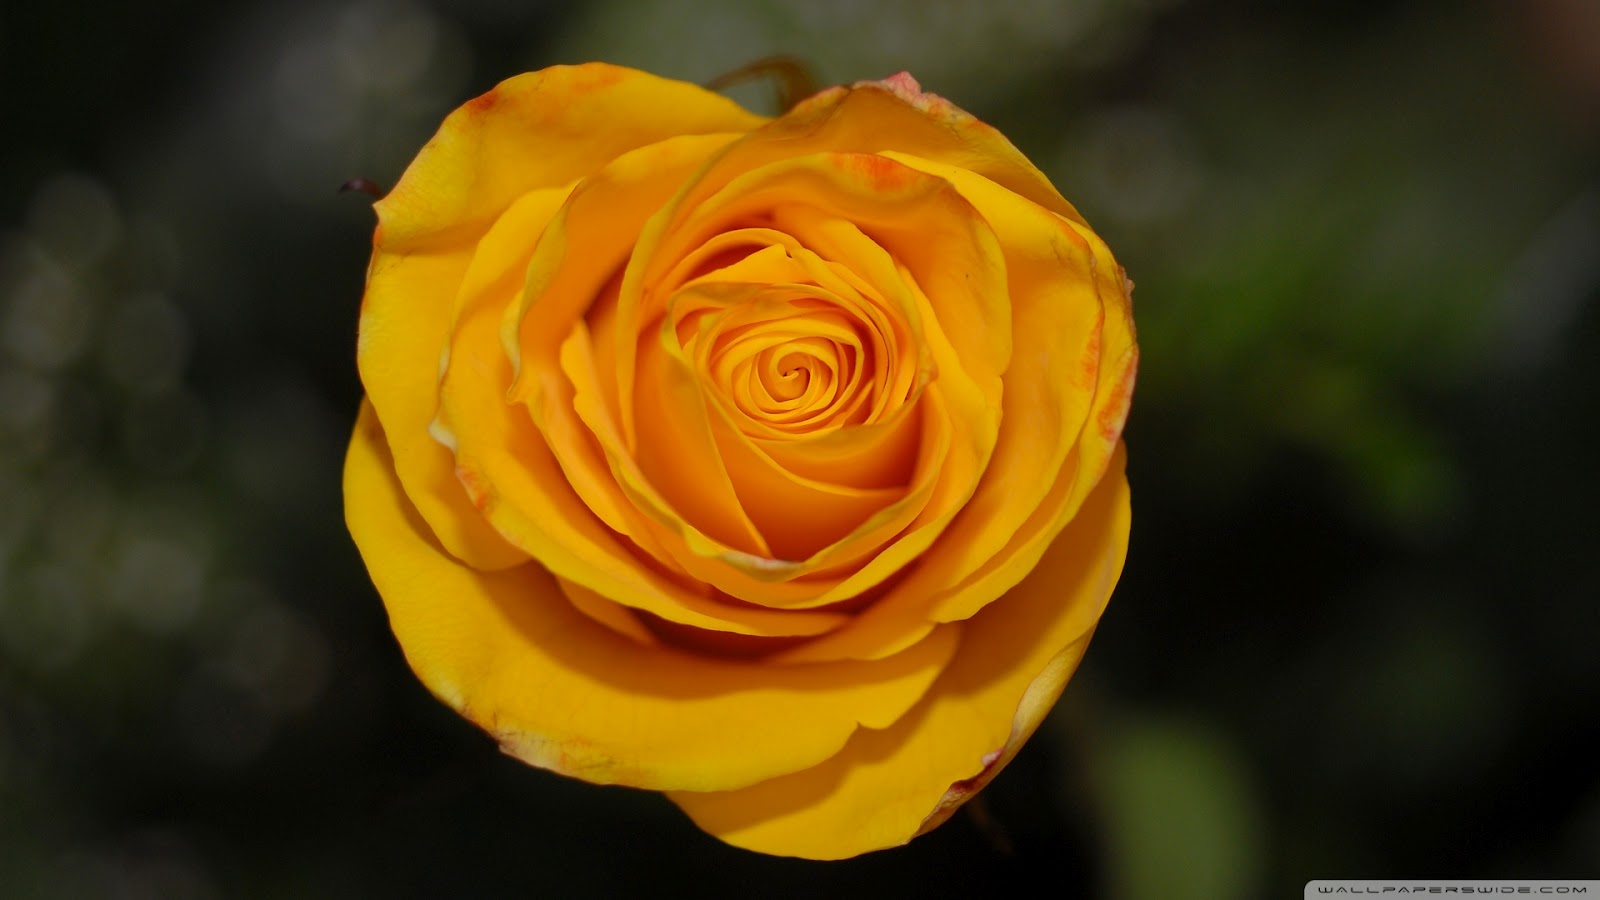 Orange Rose Wallpaper Full HD High Definition Pictures